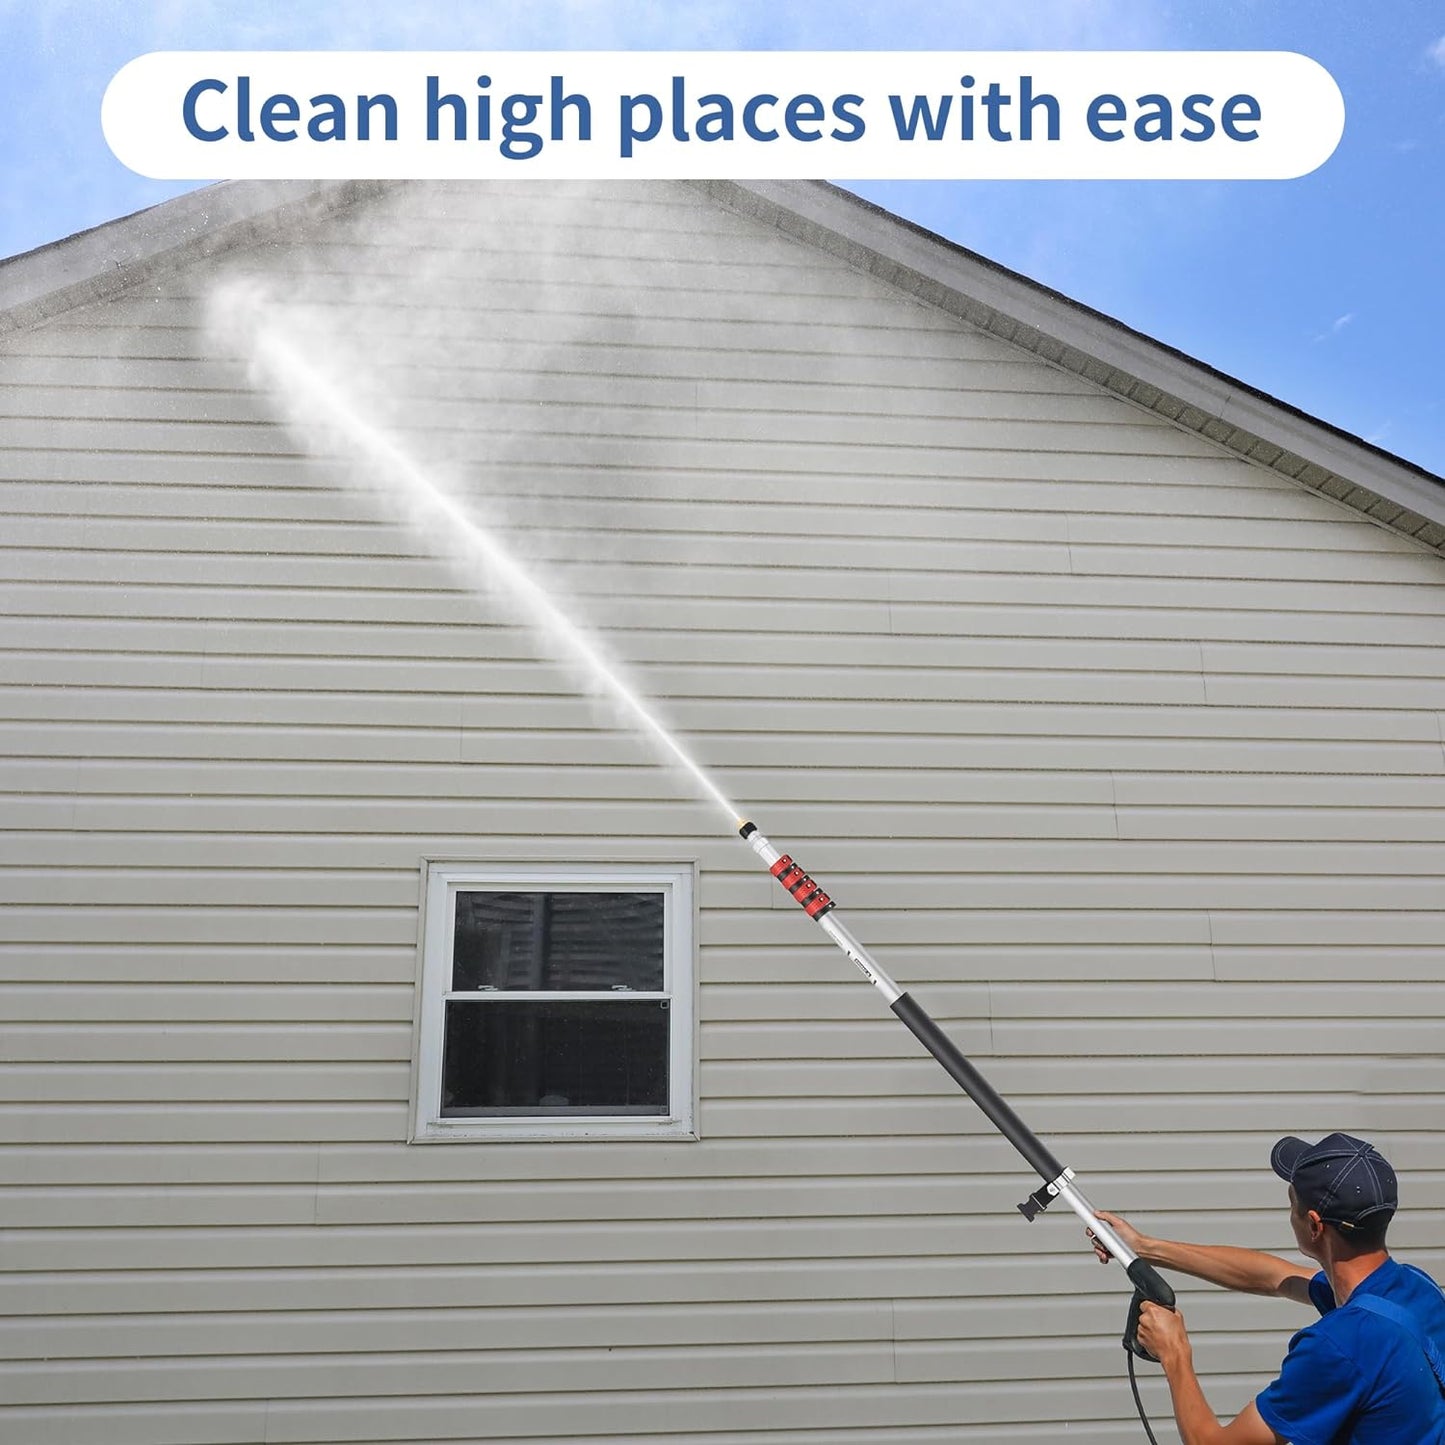 24 FT Pressure Washer Telescoping Wand - High Pressure Washer Wand Included Power Washer Extension Wands, Gutter Cleaner, 7 Spray Nozzle Tips, 2 Hose Adapters and Support Belt